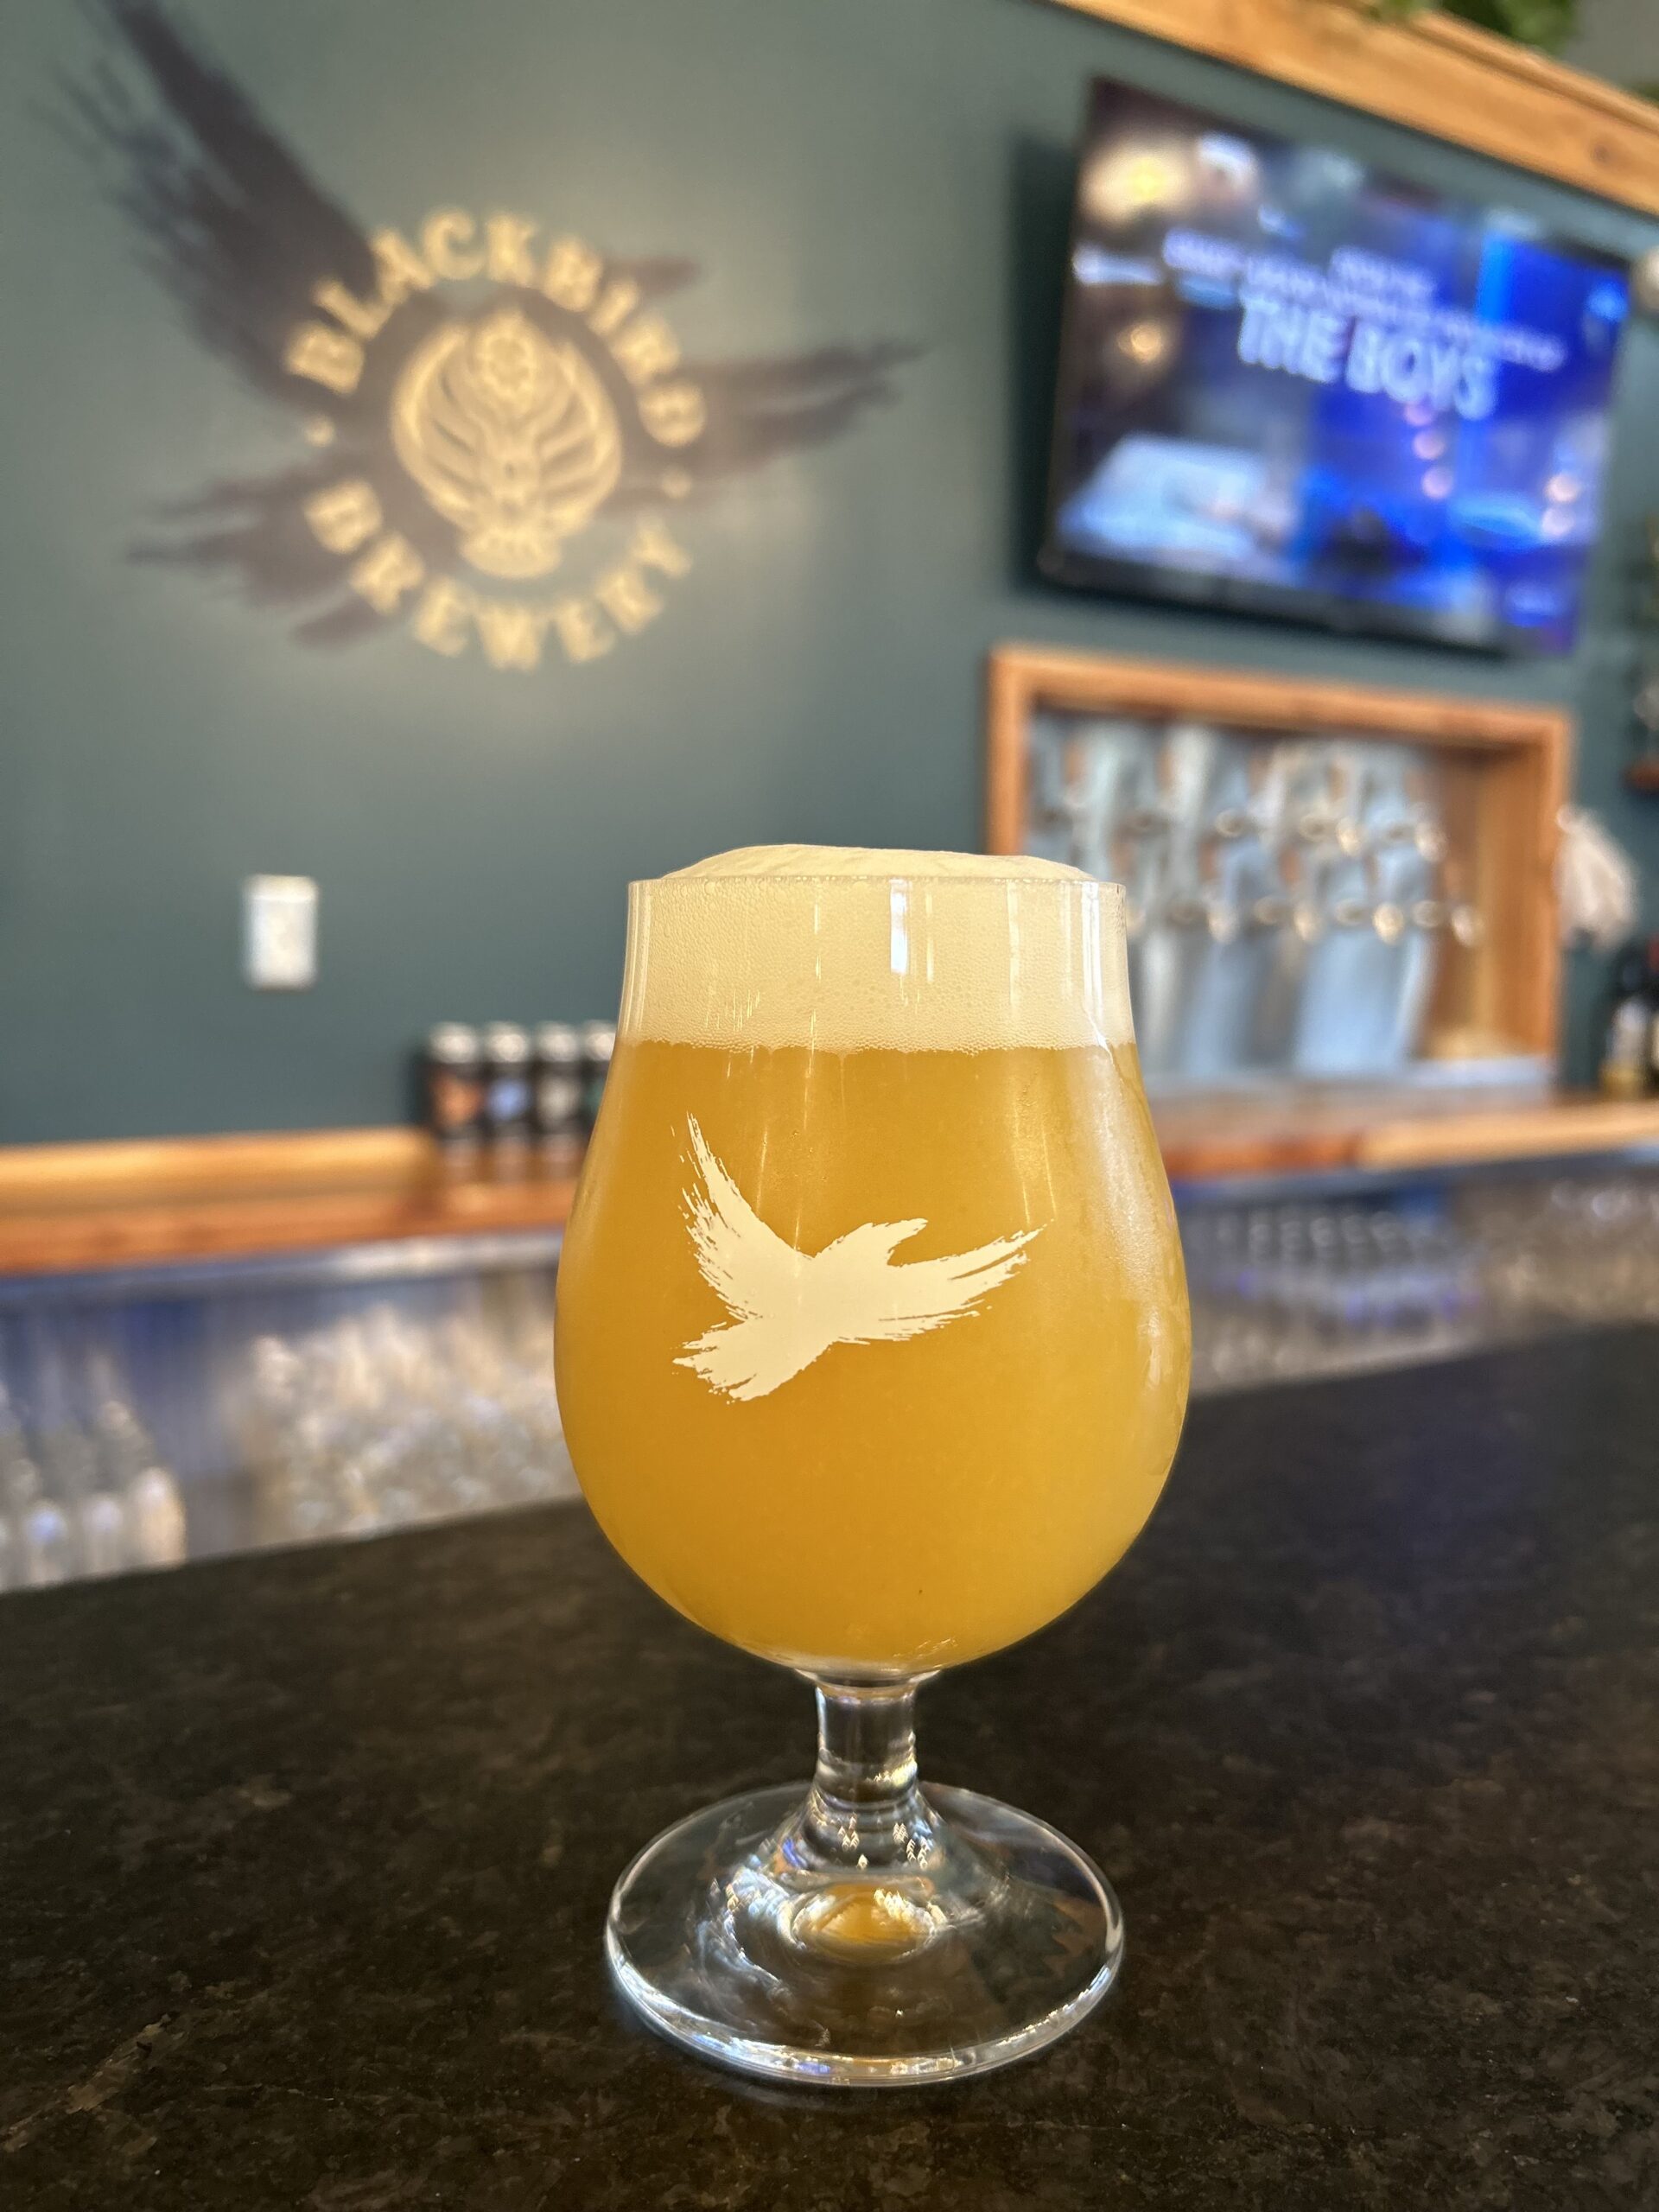 Local Beer Wake Forest, Raleigh, NC - Blackbird Brewery